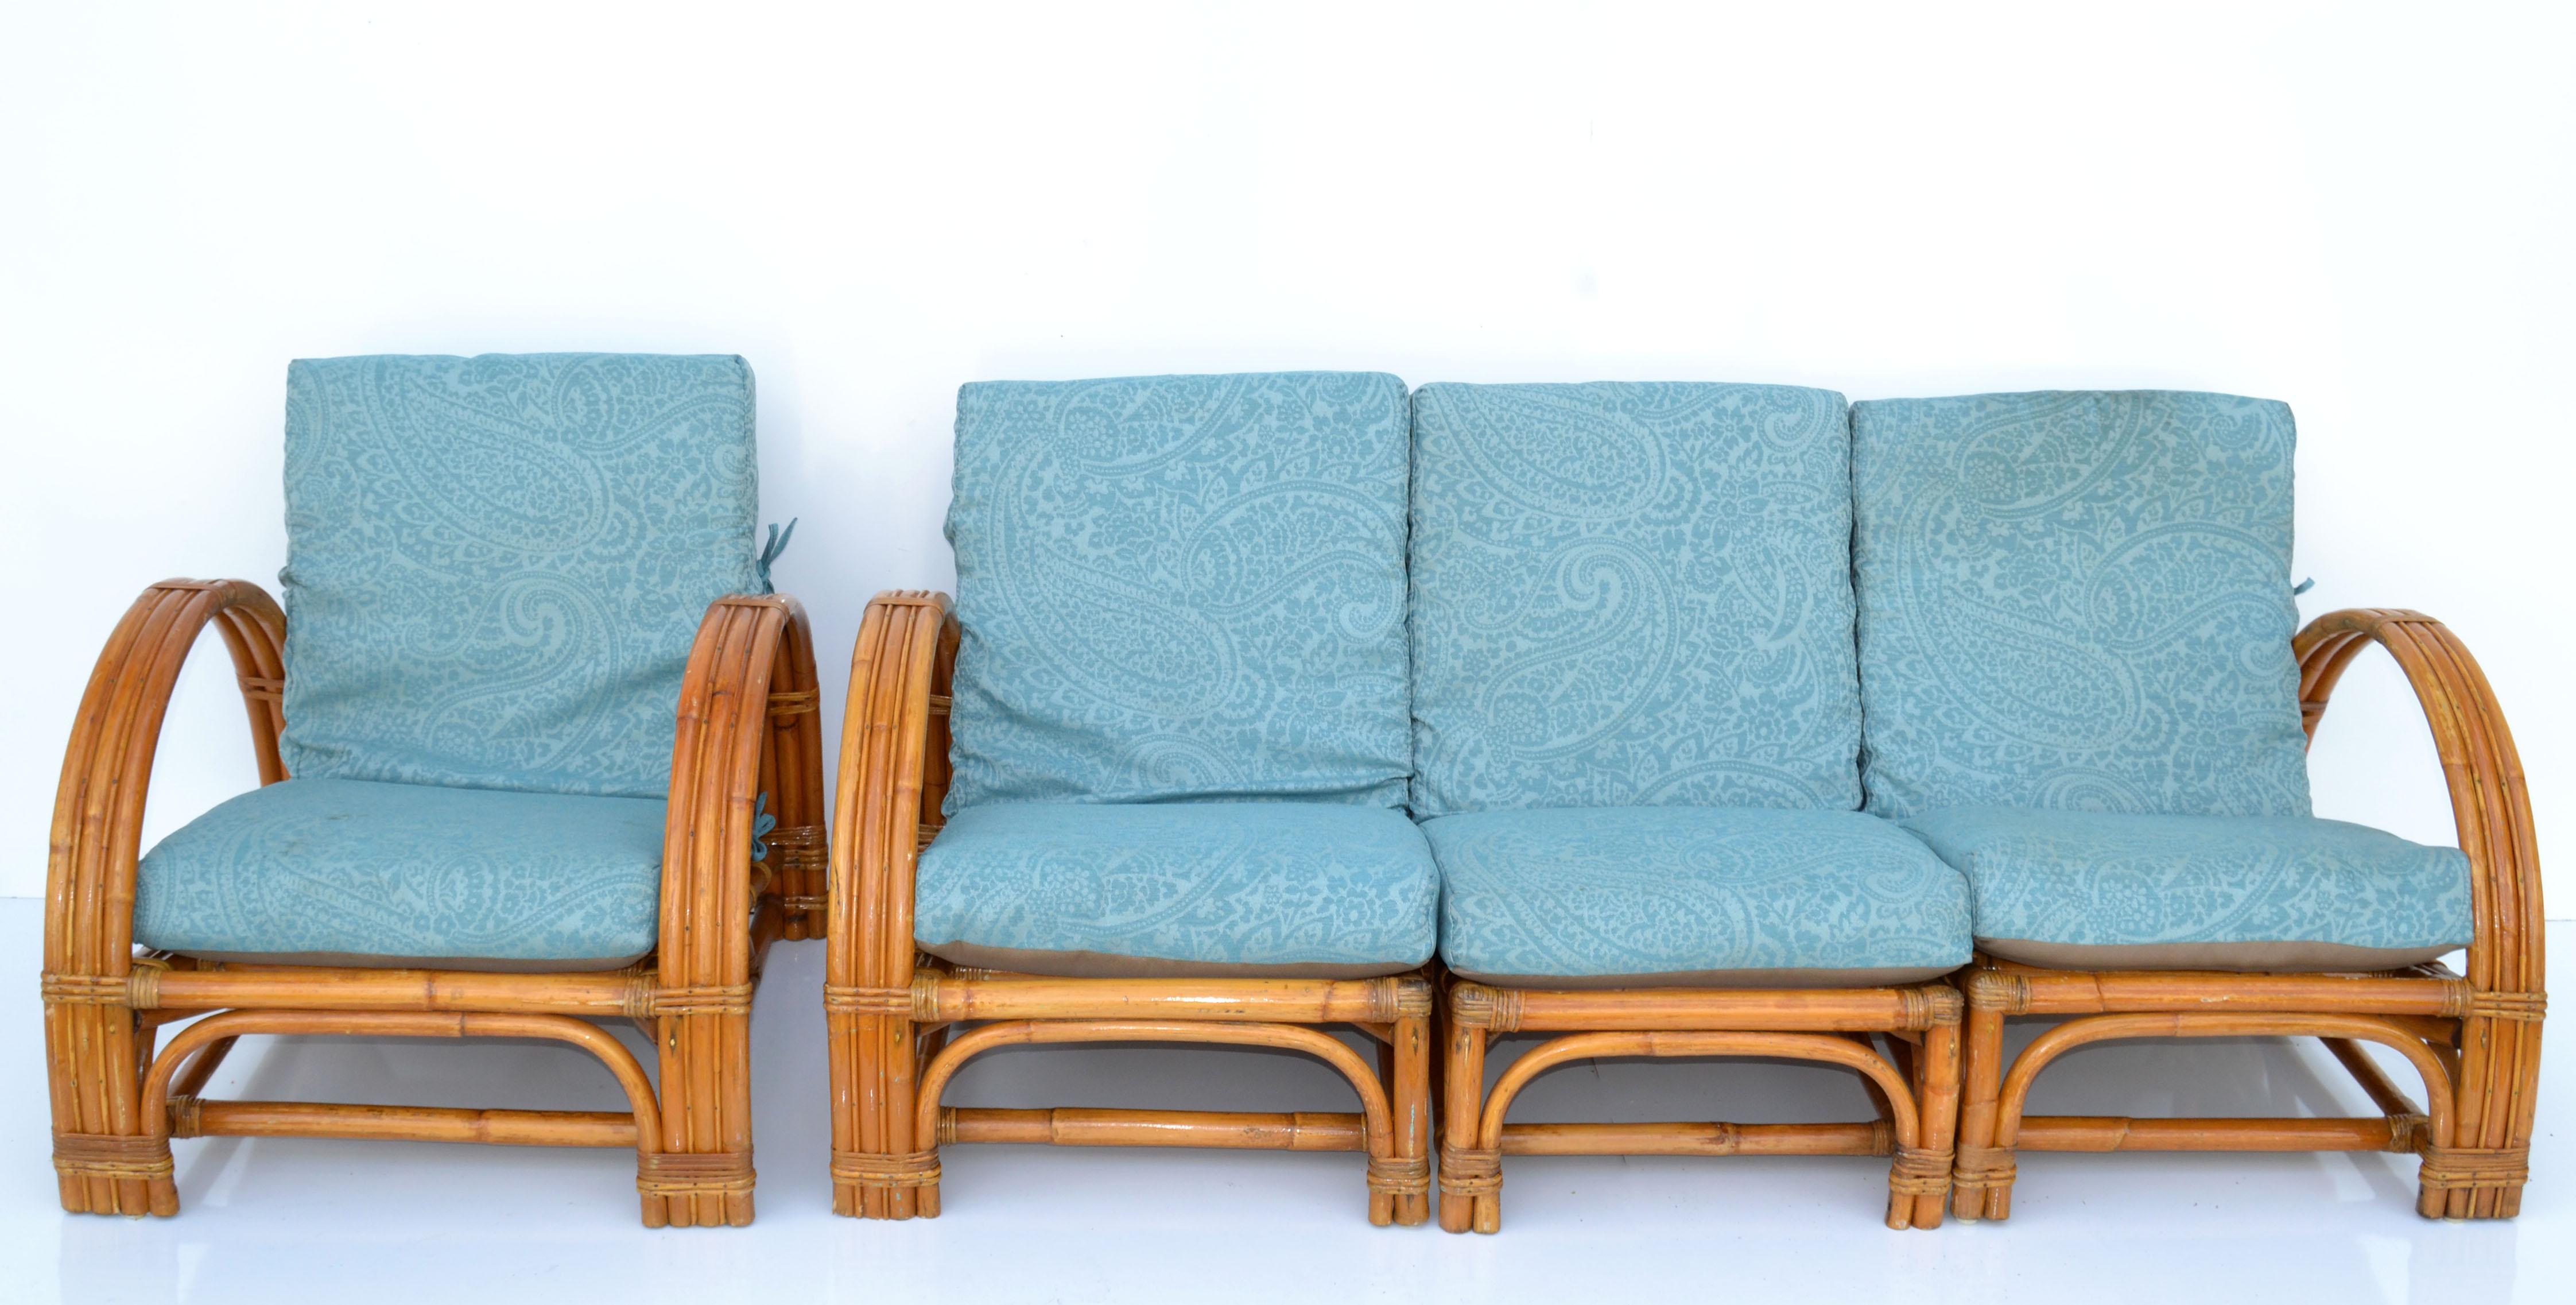 Calif Asia 4 Piece Seating Set Bamboo Sofa & Lounge Chair Turquoise Upholstery 7